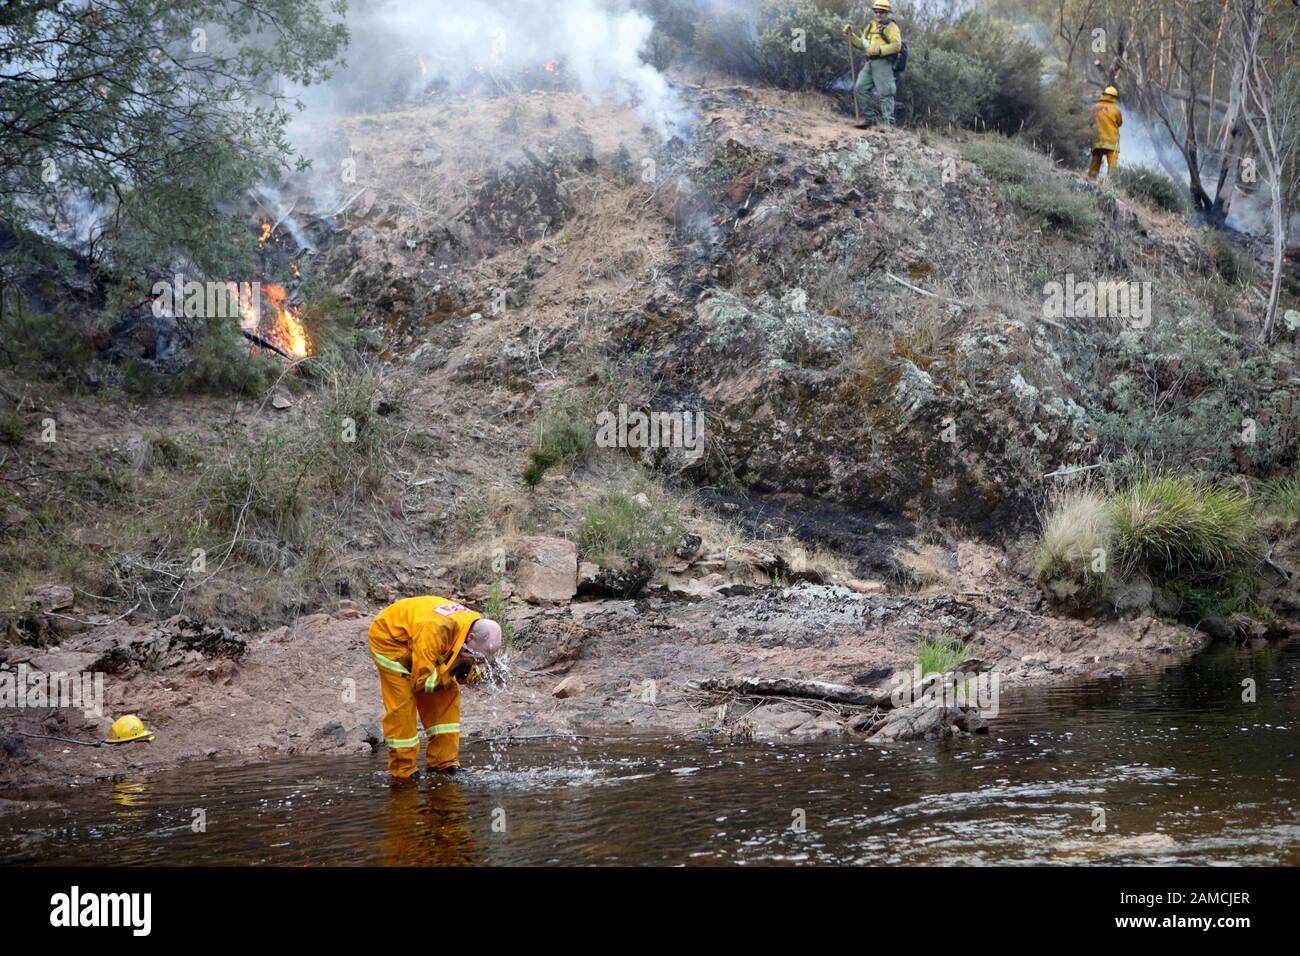 Victoria, Australia. 12th Jan, 2020. Fire fighter Roger Walkvin washes his face with water from a stream as a joint Australian and U.S. strike team blackline an area in order to control a bushfire and protect nearby structures, in Alpine National Park near Omeo. The Australian firefighters are with Country Fire Authority Australia and the U.S. team is the third rotation in for 28 days and they come from five different U.S. agencies. Credit: ZUMA Press, Inc./Alamy Live News Stock Photo